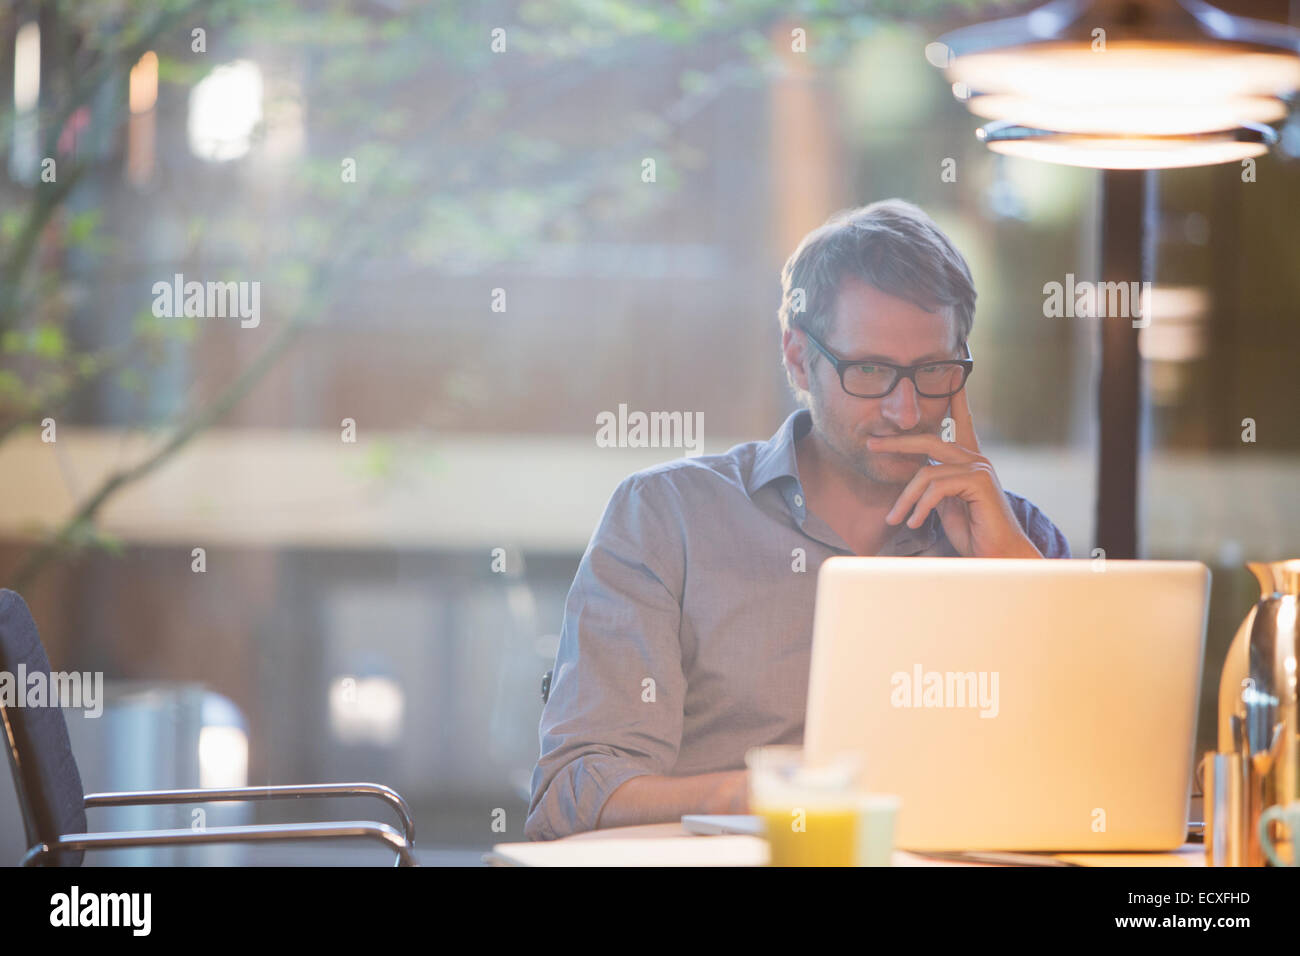 Businessman working on laptop in office Stock Photo